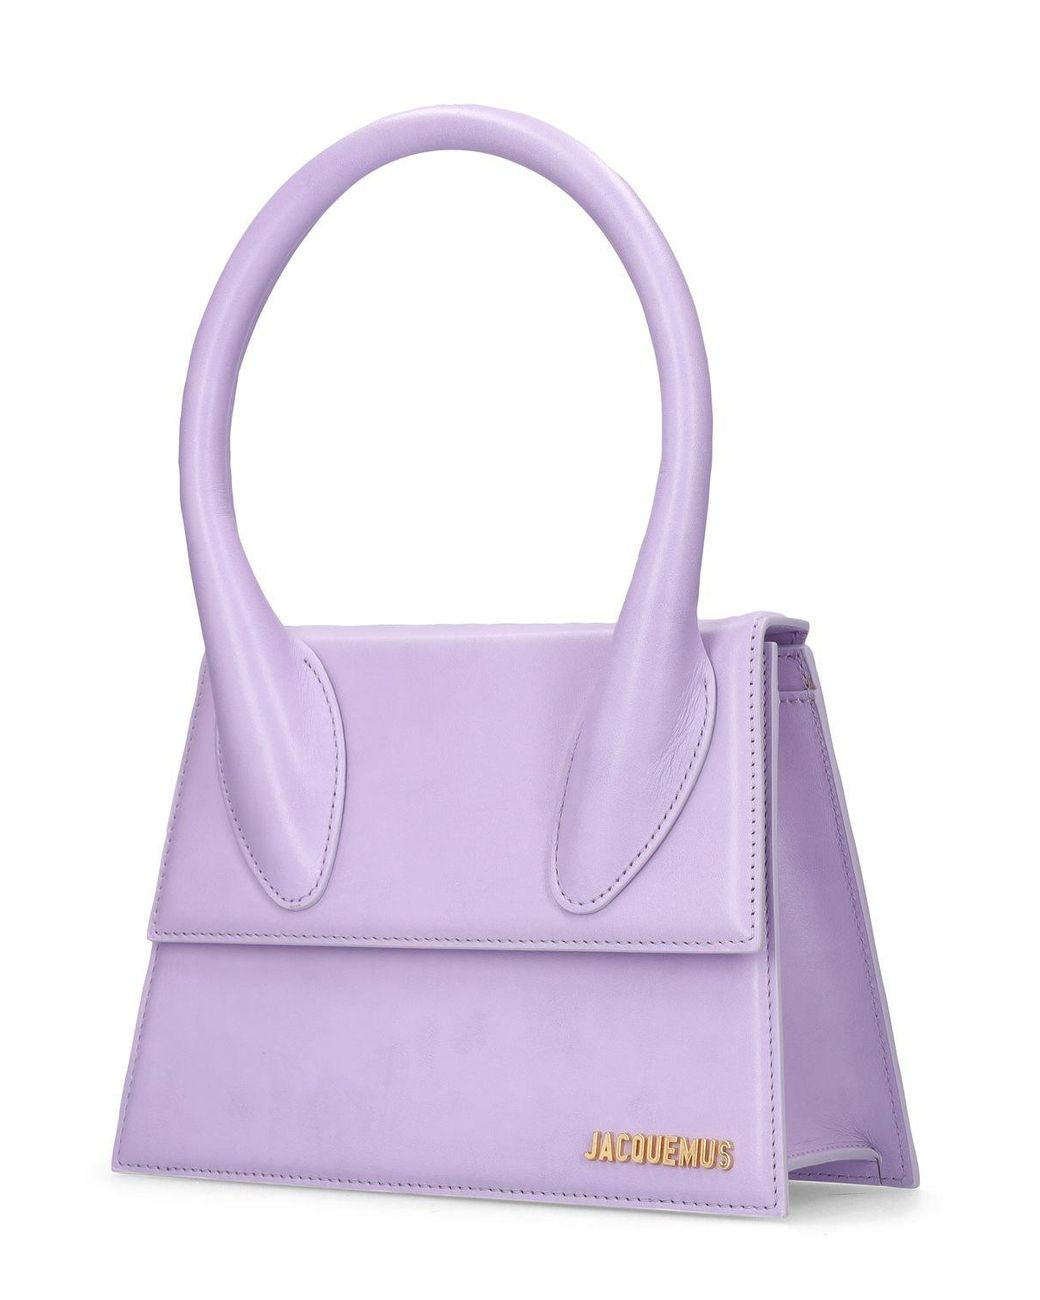 Jacquemus Le Grand Chiquito Leather Top Handle Bag in Purple | Lyst